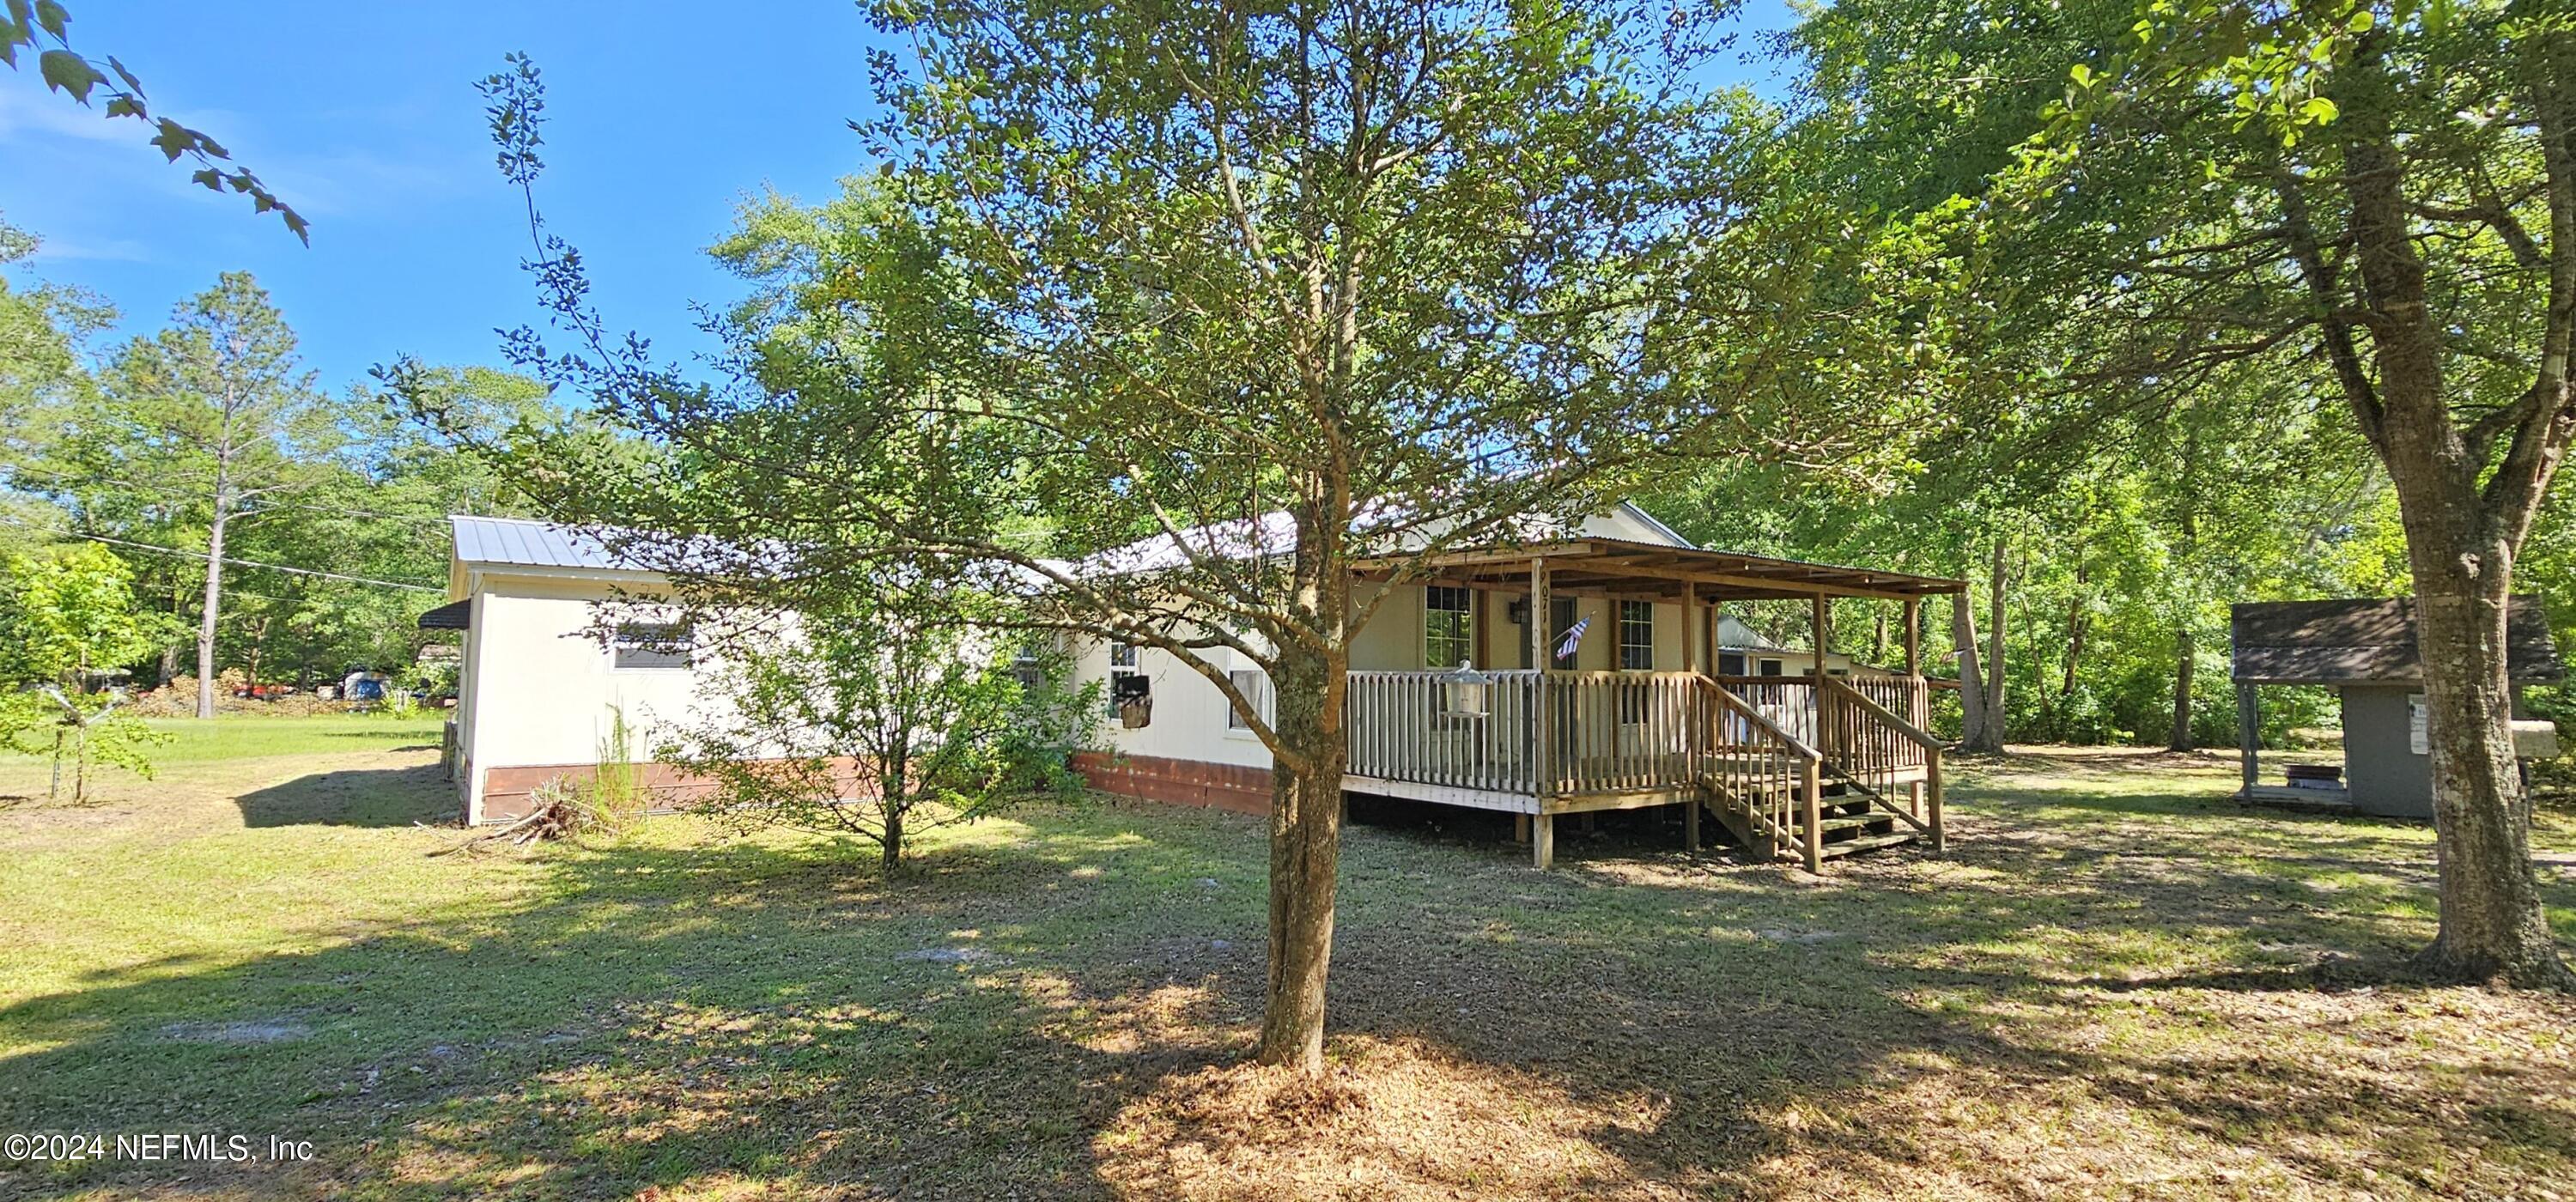 Bryceville, FL home for sale located at 9071 Old Wire Place, Bryceville, FL 32009